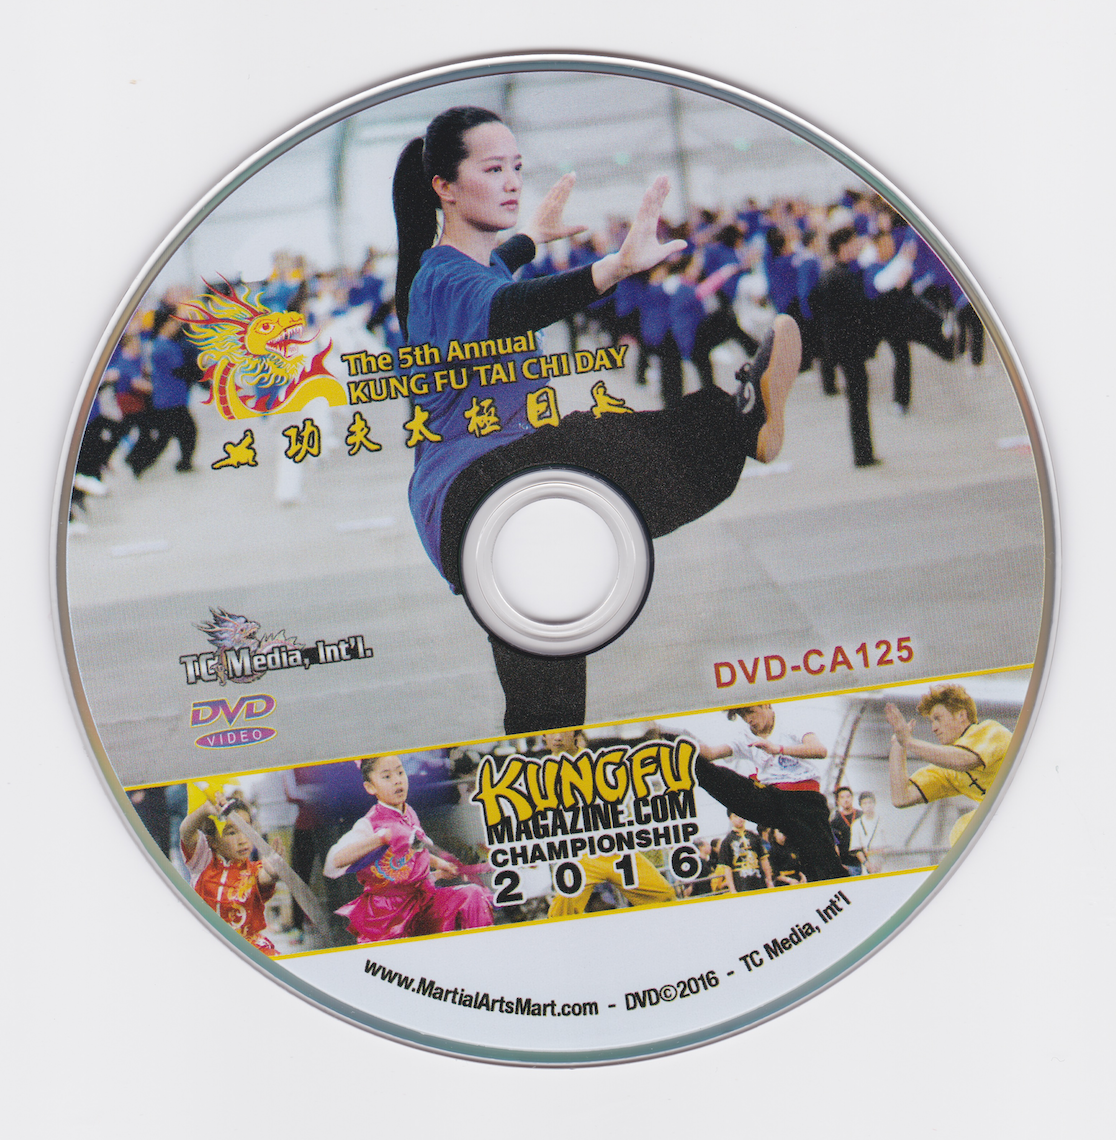 5th Annual Tai Chi Day Event DVD (Preowned) - Budovideos